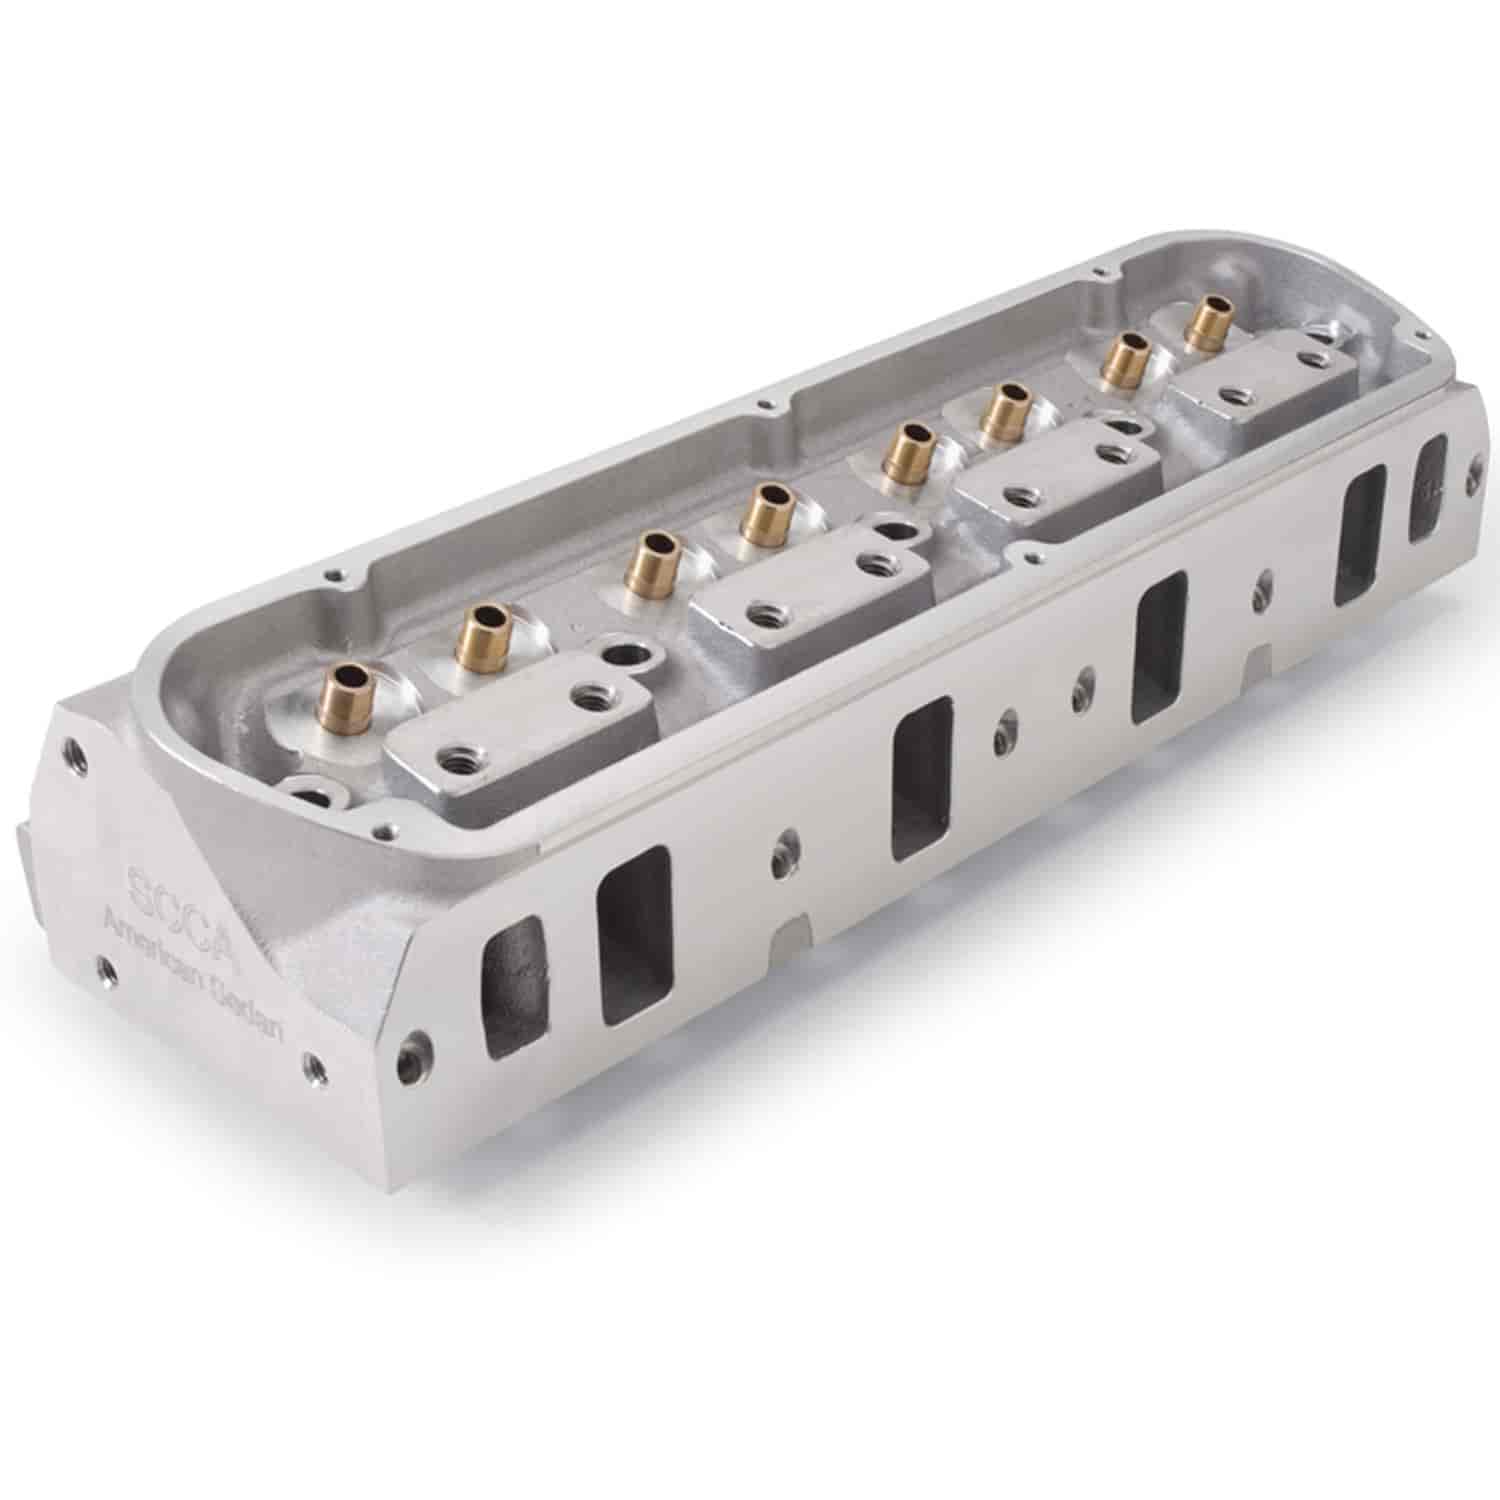 SCCA Perfromer RPM Cylinder Heads for Small Block Ford